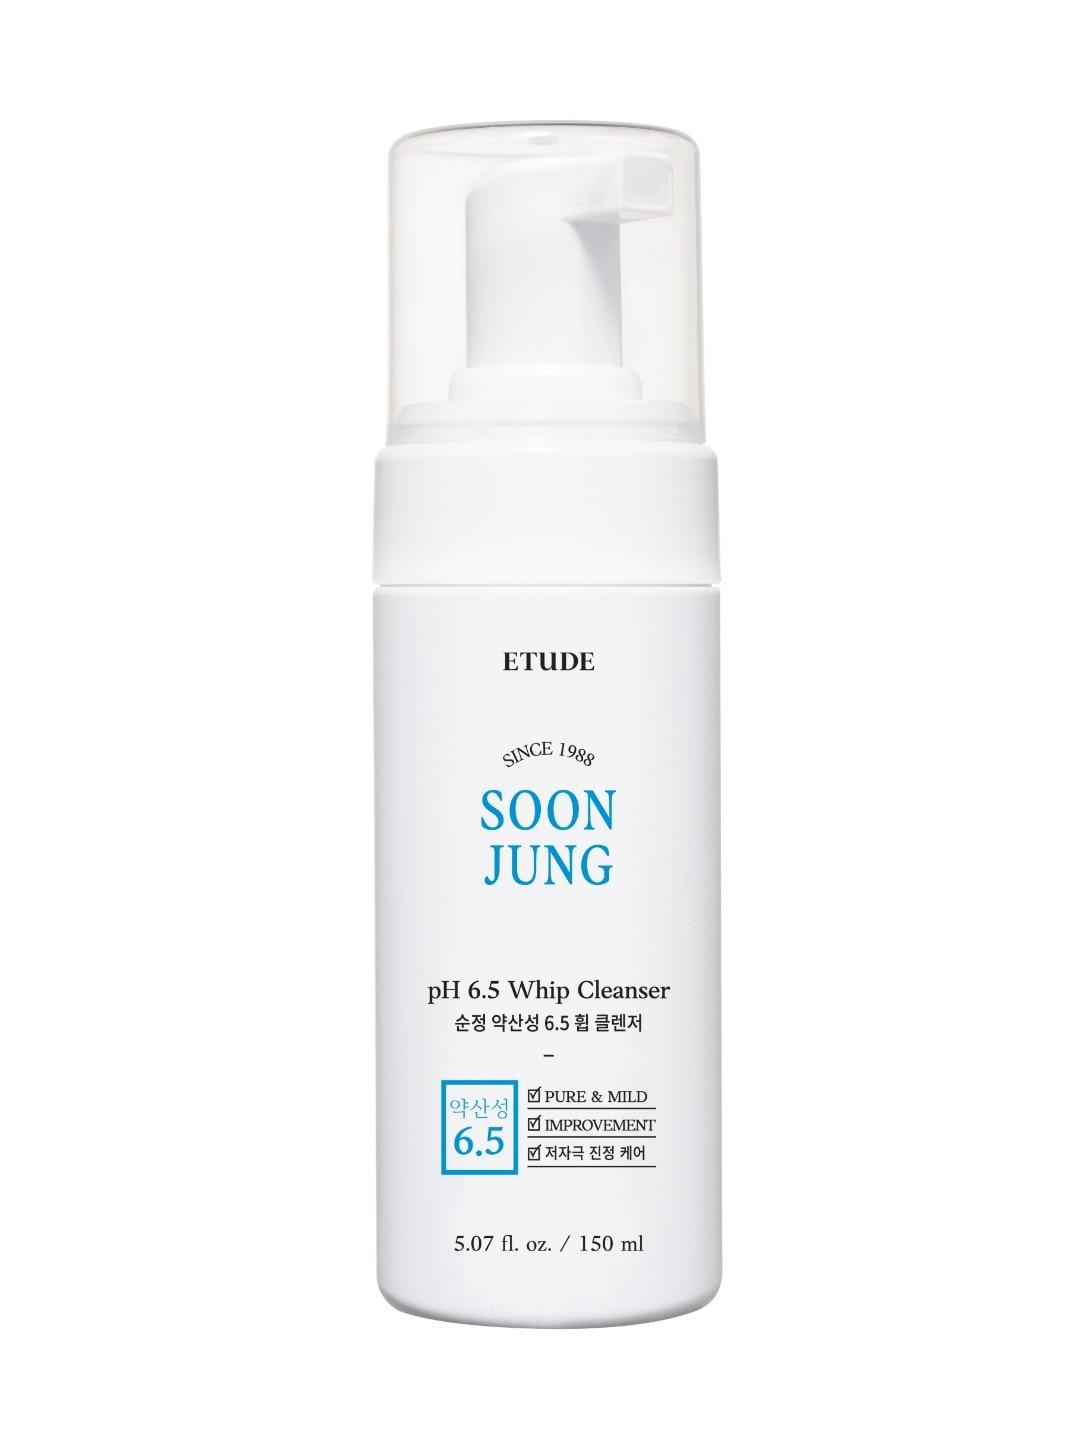 etude-soon-jung-ph-6.5-whip-cleanser-face-wash-with-panthenol-&-madecassoside---150ml